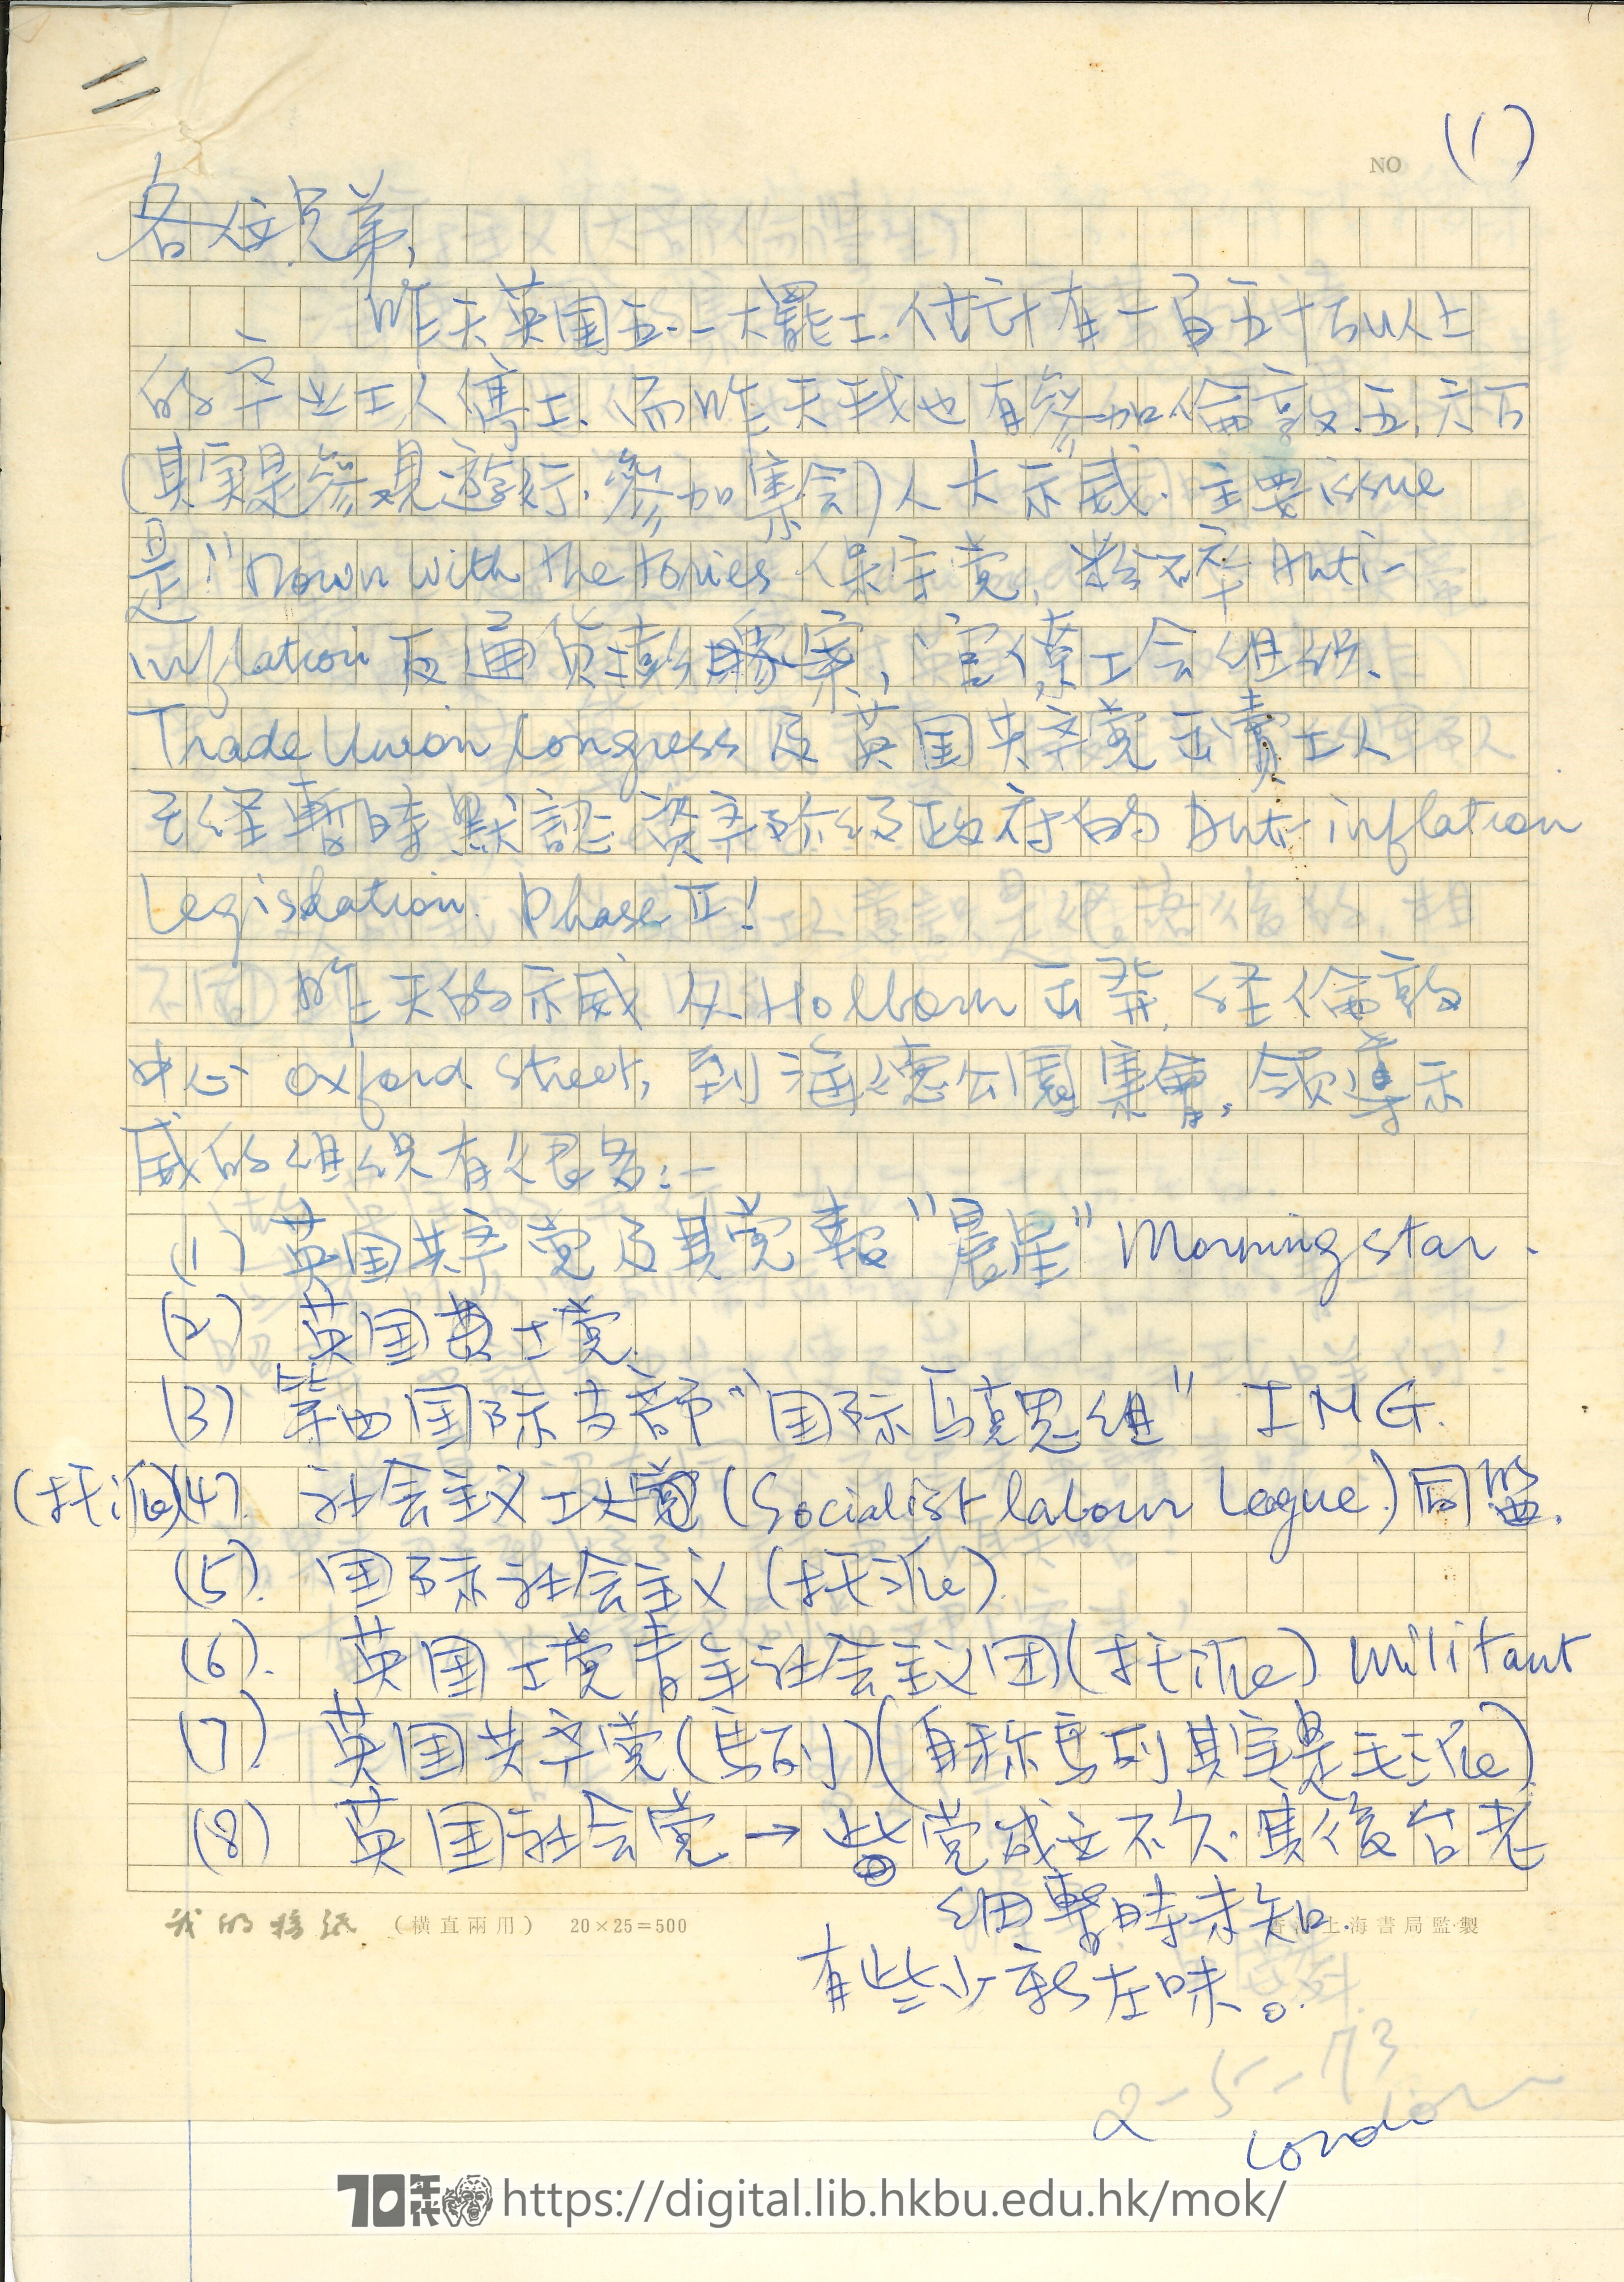   Letter from Ng Ka-lun to friends 吳家麟 